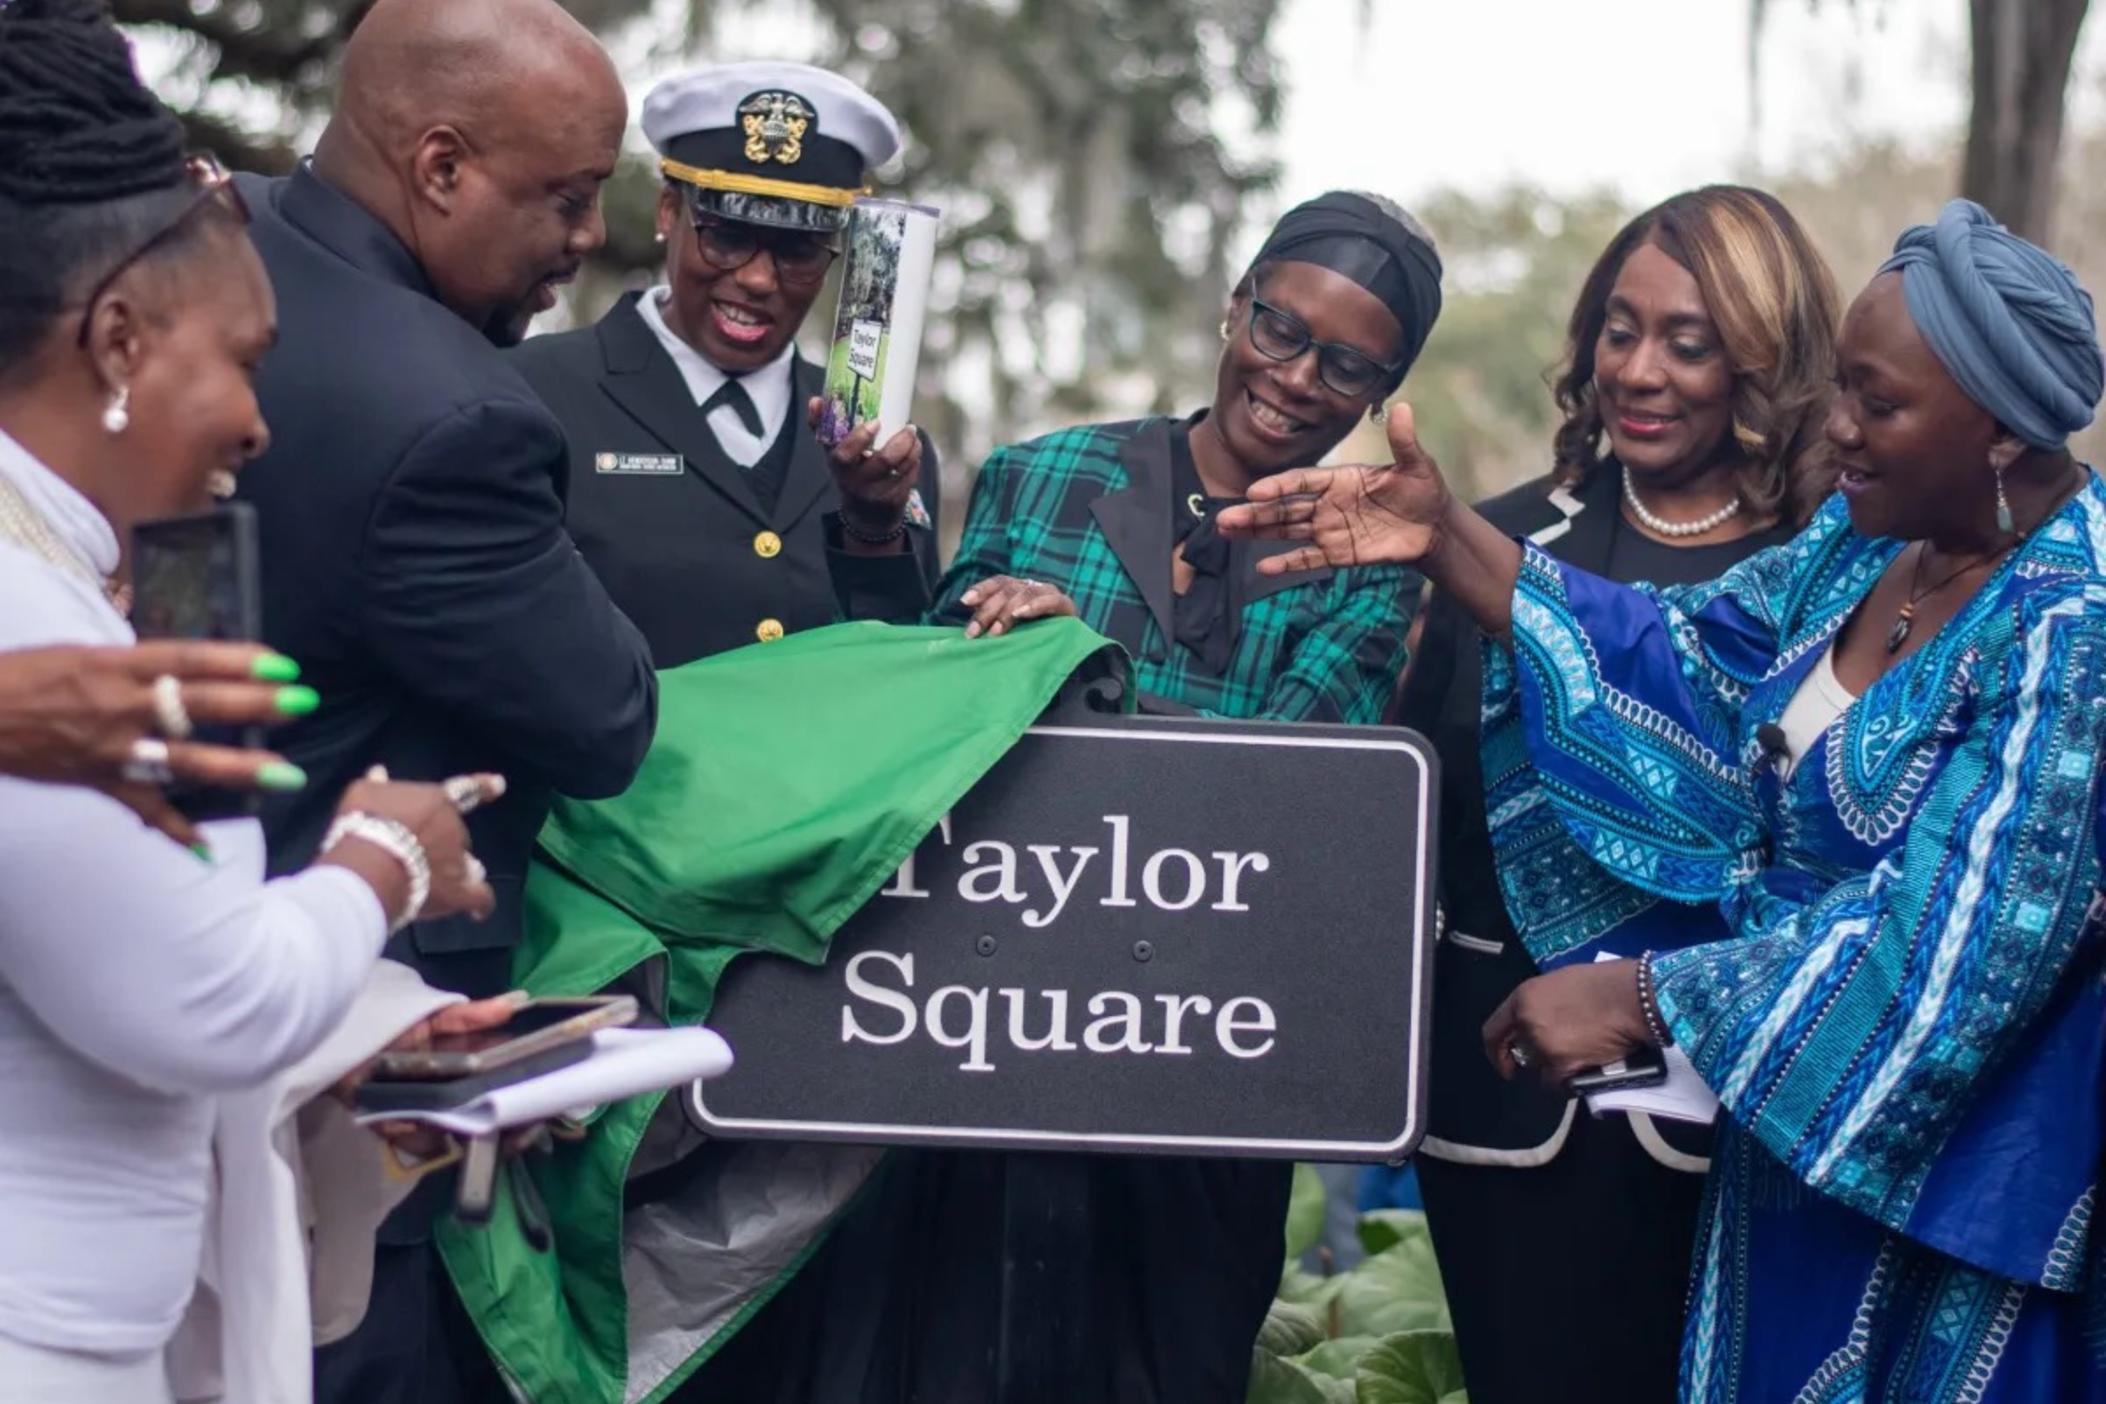 Mayor Van Johnson pulls back the cover on the new sign for Taylor Square along with Patt Gunn, right in blue, along with city council members and others unveiled the sign for Taylor Square. Credit: Jeffery Glover/The Current